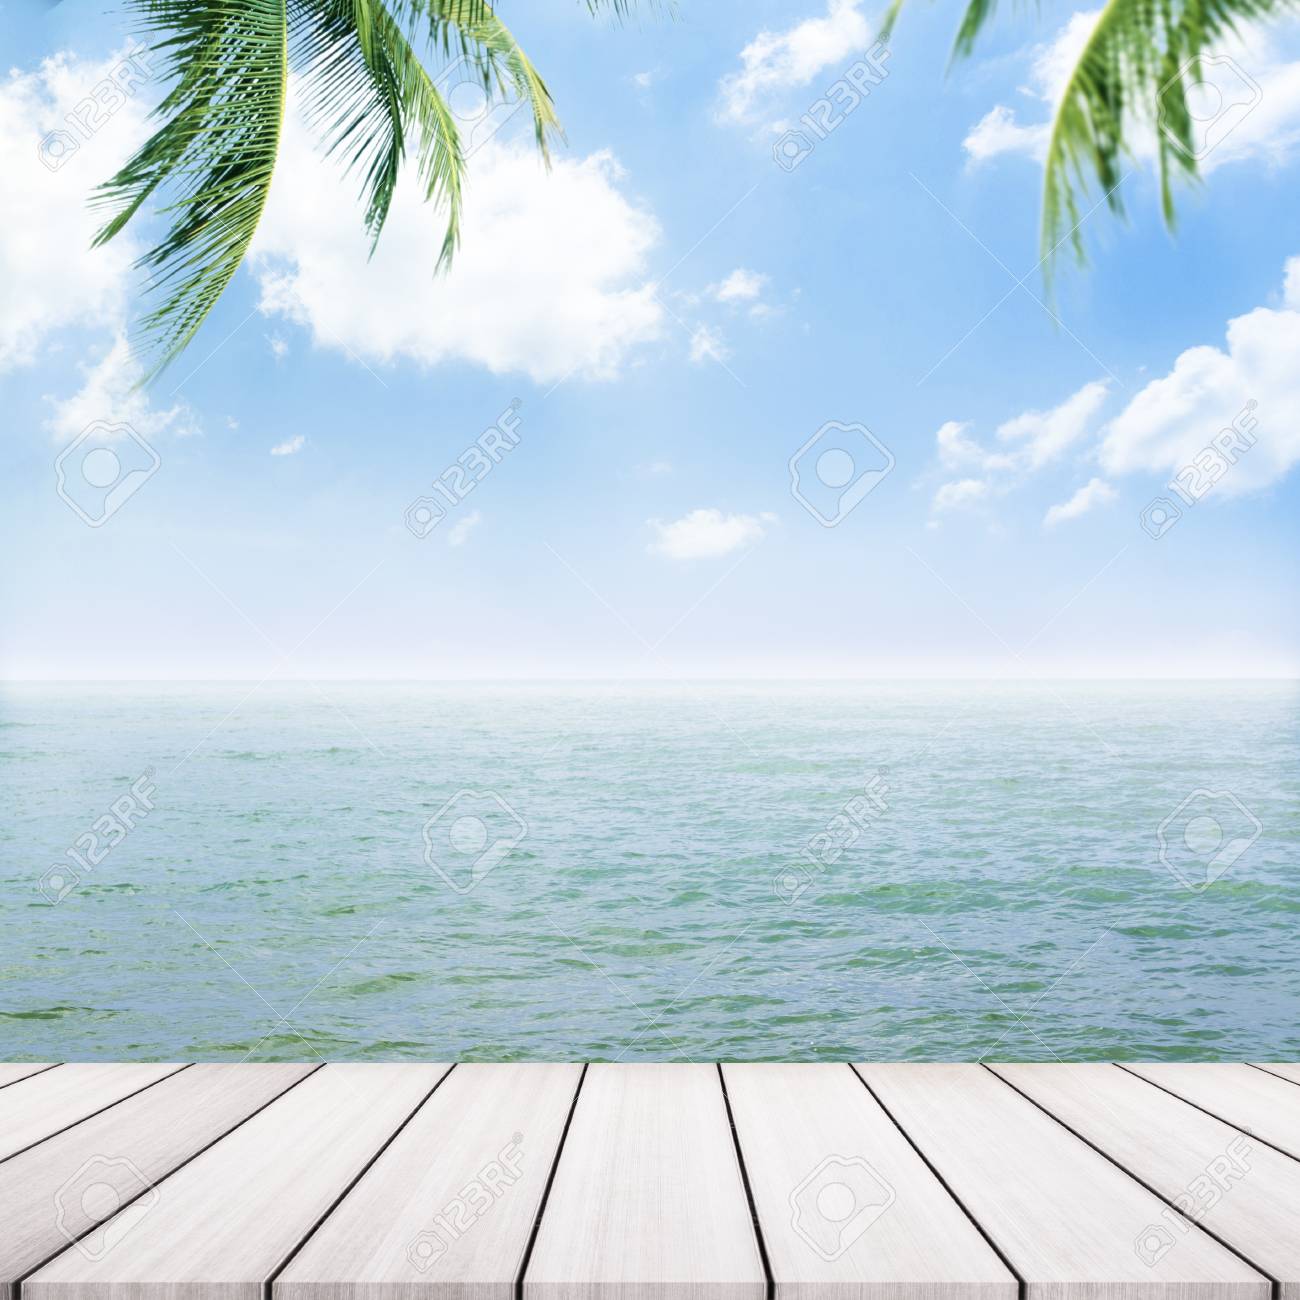 Wooden Table On Beach Background In Summer Time Empty Ready